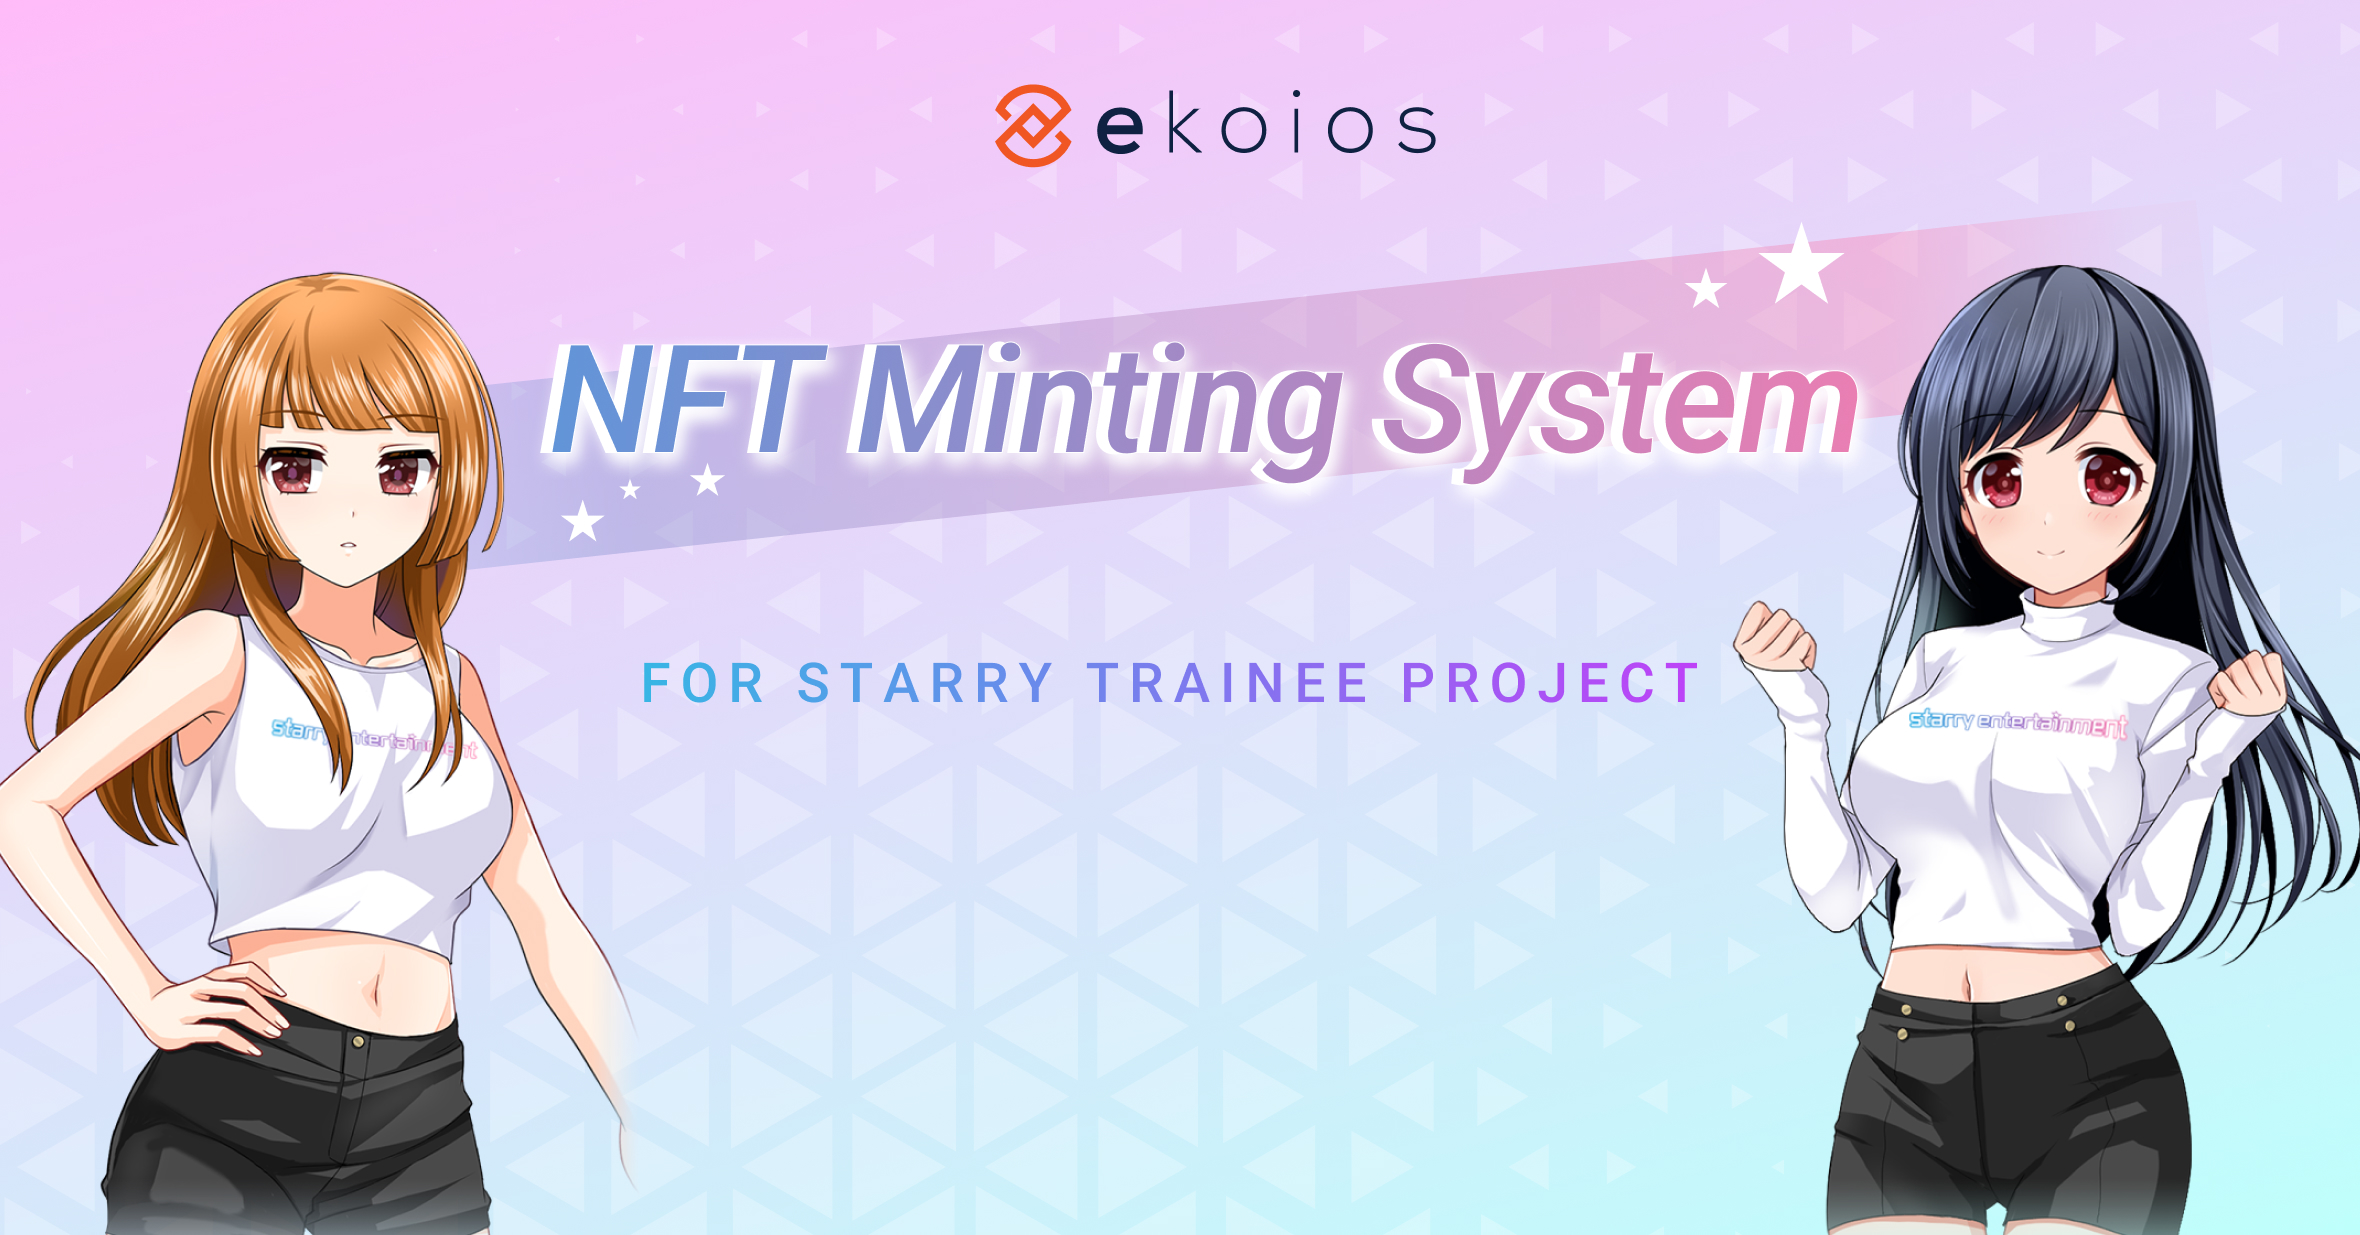 The powerful NFT Minting System for Starry Trainee project